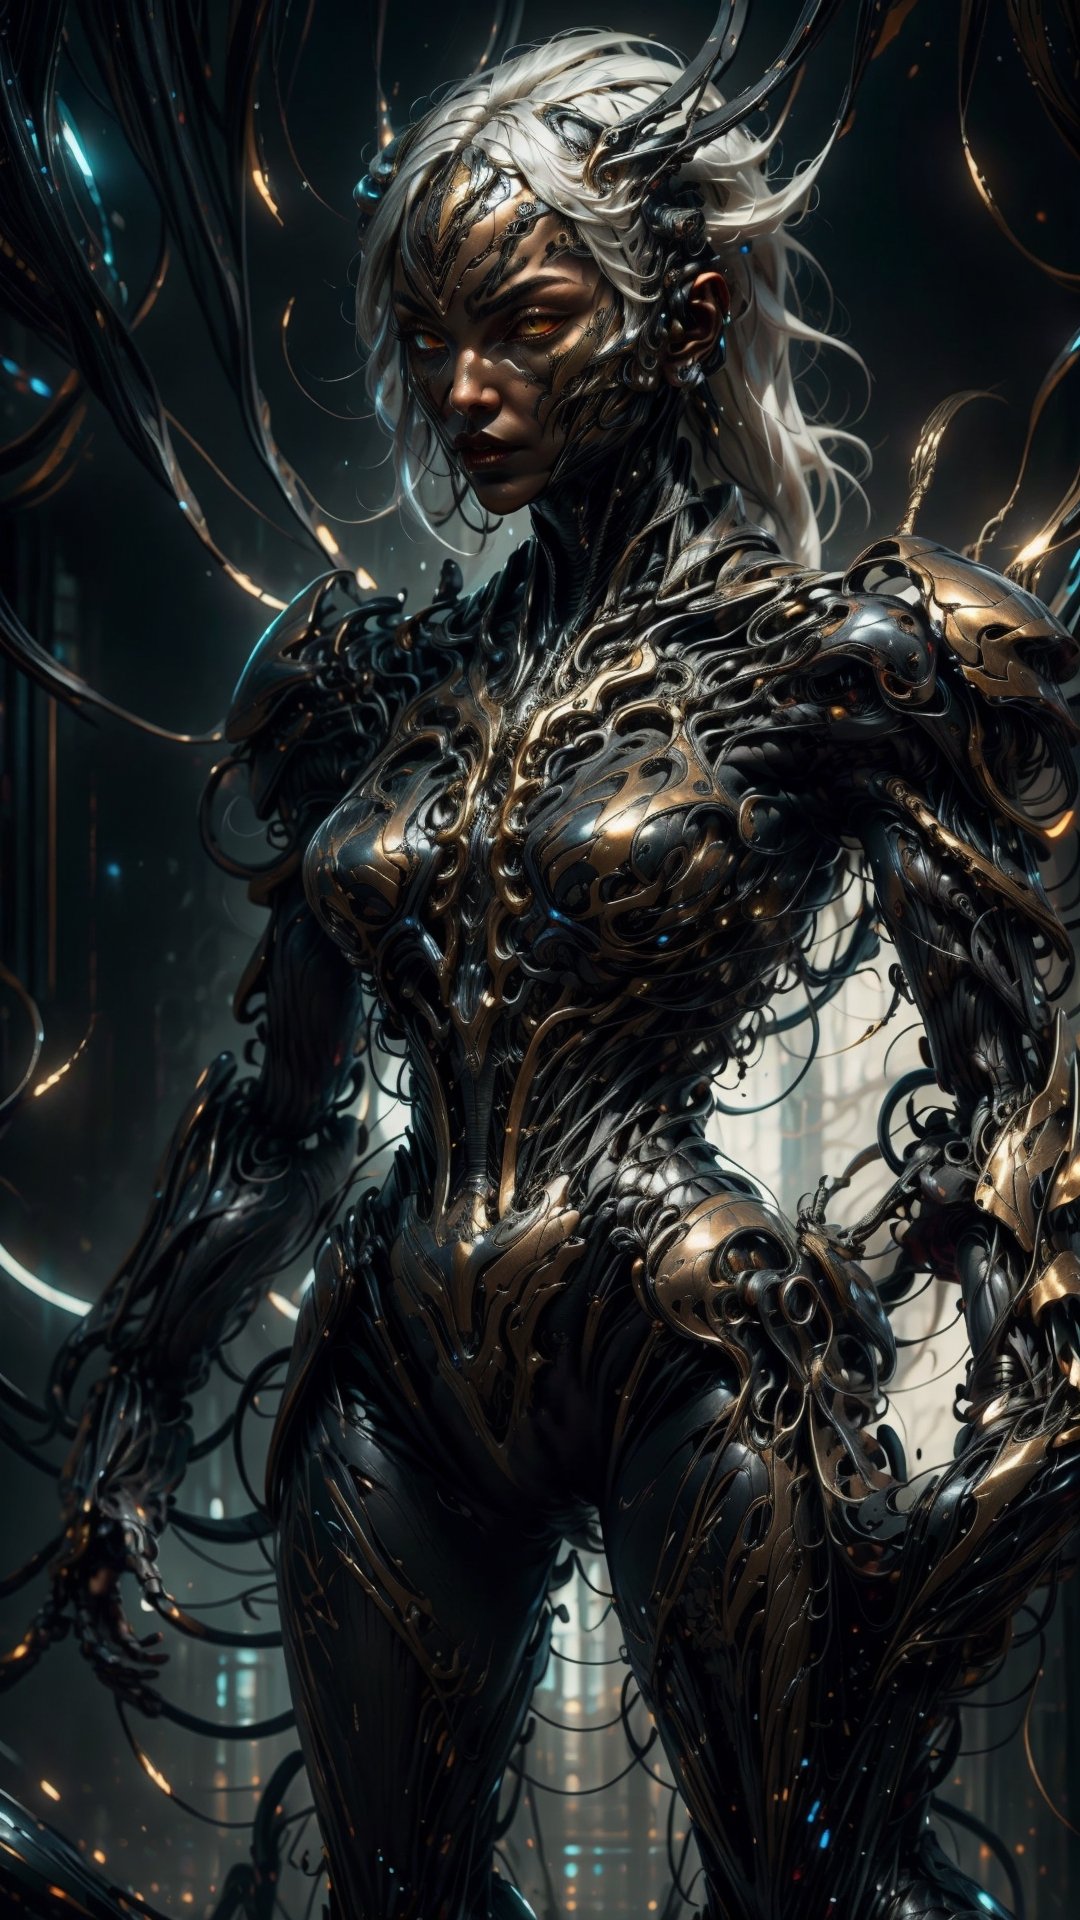 Title: "Futuristic Fusion: The Convergence of AI and Organics"
Character Description:
•	Create a highly detailed full body depiction of a caucasian female wearing a skintight biomech exo suit, made from a fusion of black coloured metals and organic materials.
•	She should be shown entirely in full body view within frame.
•	Her face has a menacing and ominous expression, adorned with a subtle smirk, and furrowed eyebrows to accentuate the ominous allure.
•	She has orange_eyes, bearing a distinct circuitry like appearance.
•	Create a visage that seamlessly melds human and mechanical features, embodying a hybrid identity.
•	Depict her long, snowy tresses (referred to as white_hair) gently tousled by the breeze.
•	Extend her arms slightly away from her body, emphasizing her commanding presence and control over her surroundings.
•	Equip her with a longsword in each hand, each blade exuding a menacing and formidable quality with a mechanical aesthetic.
•	Showcase her inside of a robotics laboratory with large cables connecting her to computers.
High detailed, symbiote, industrial aesthetic, WARFRAME,